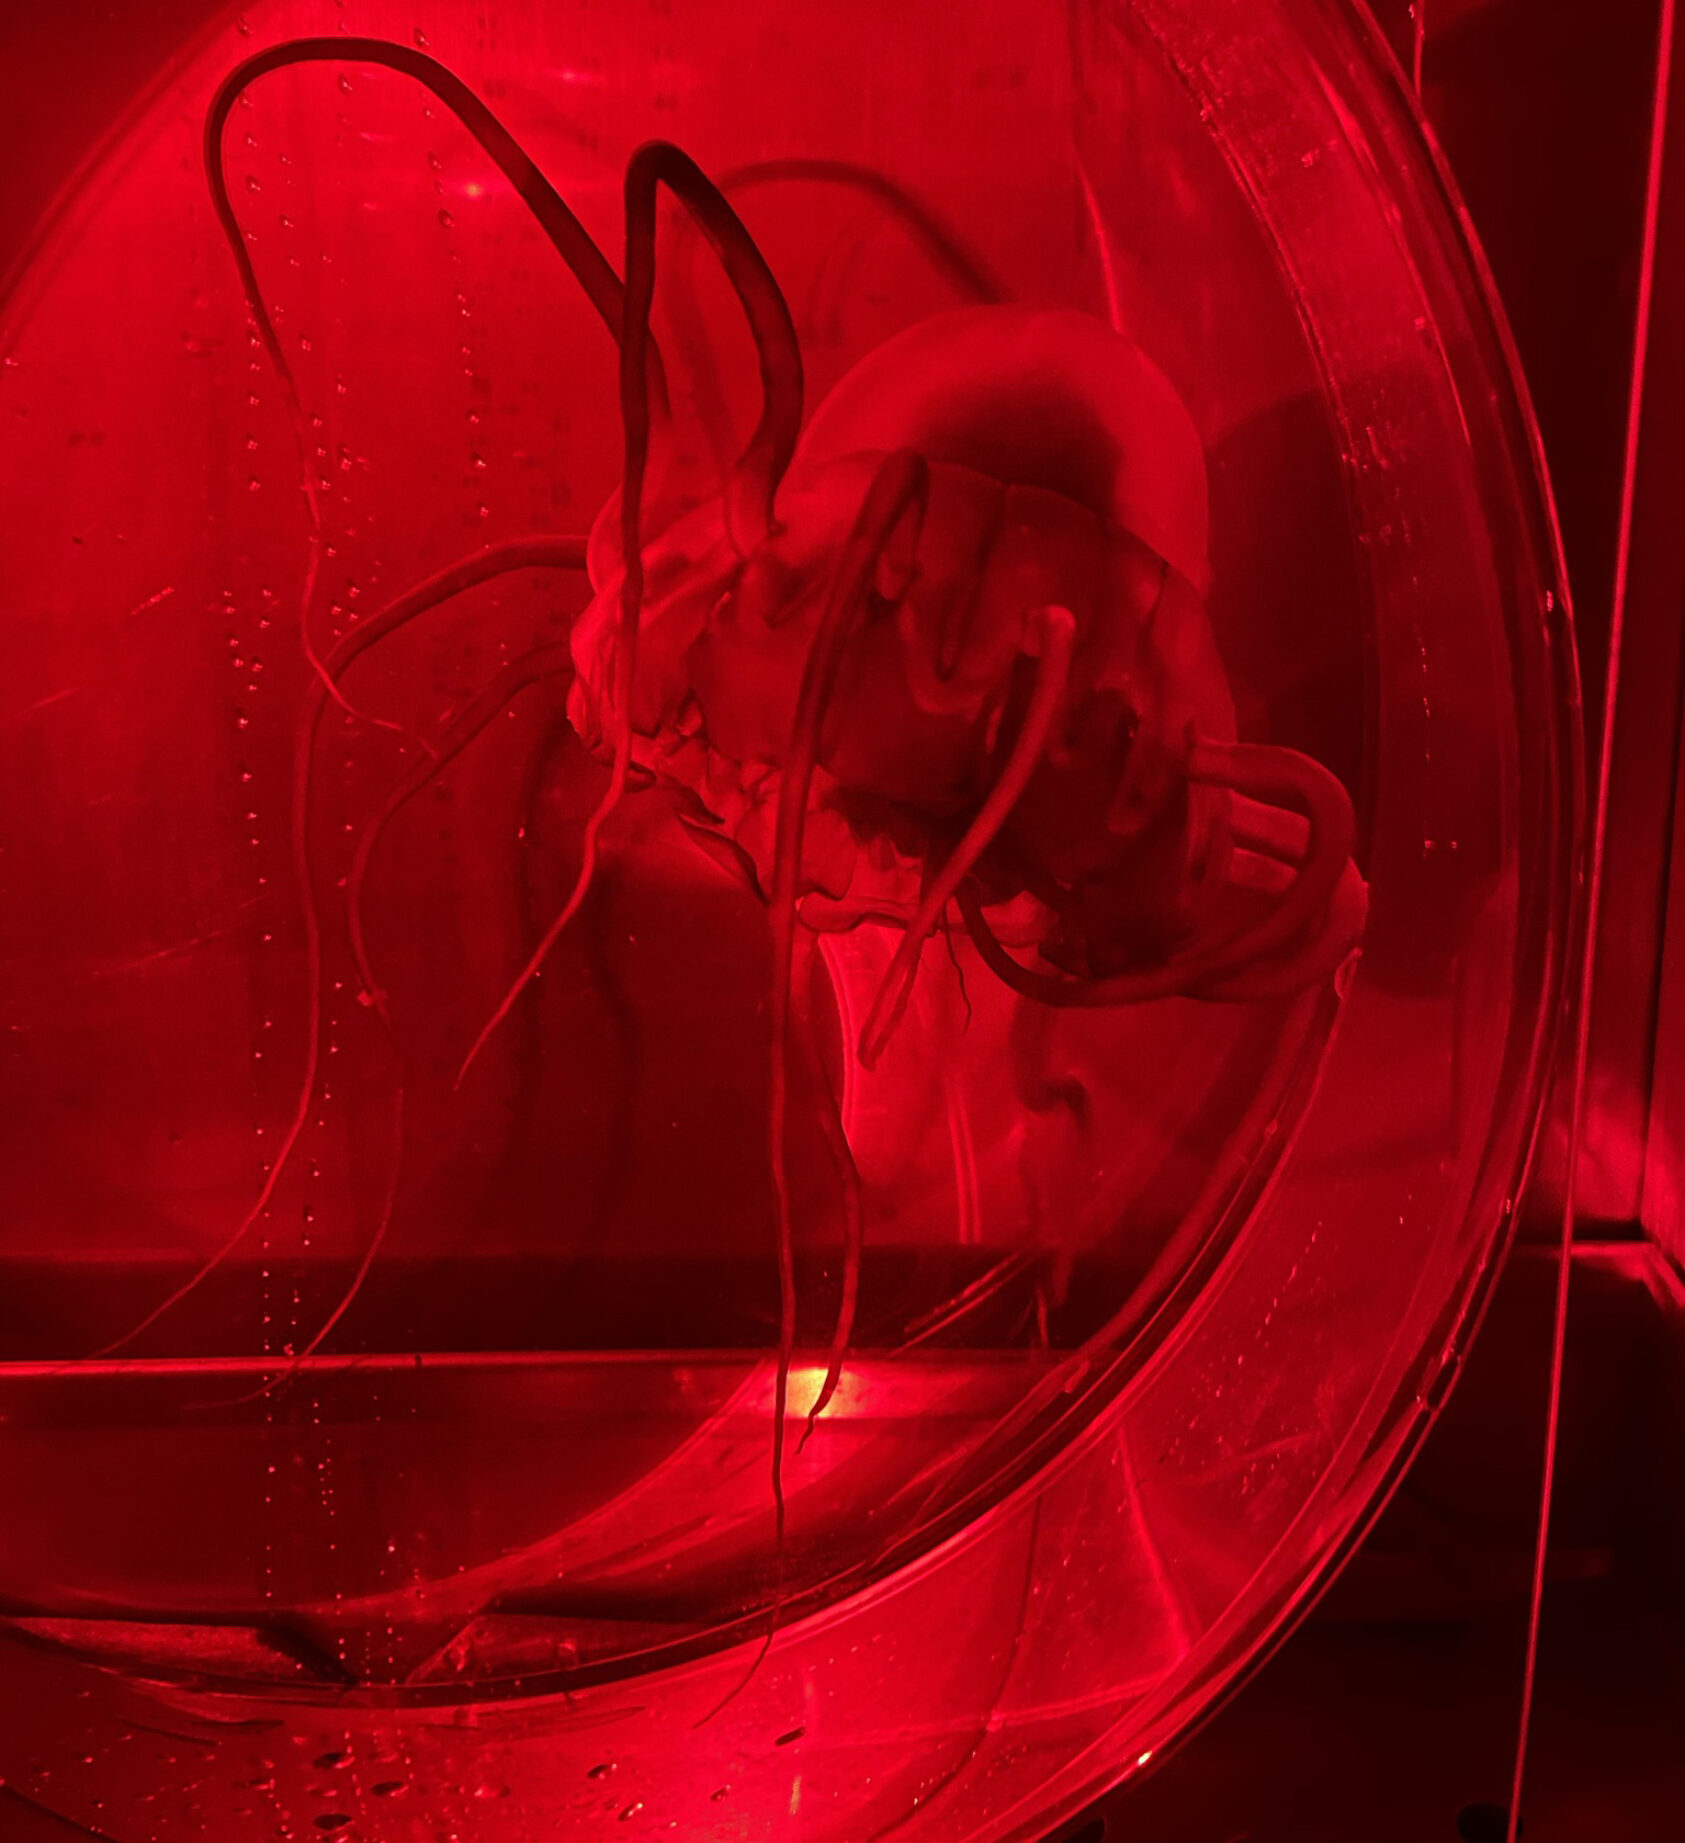 Helena Hauss, The helmet jellyfish (Periphylla periphylla) in an experimental tank. The photo was taken under red light, as helmet jellyfish are highly sensitive to bright light., H Hauss Periphylla web, , 